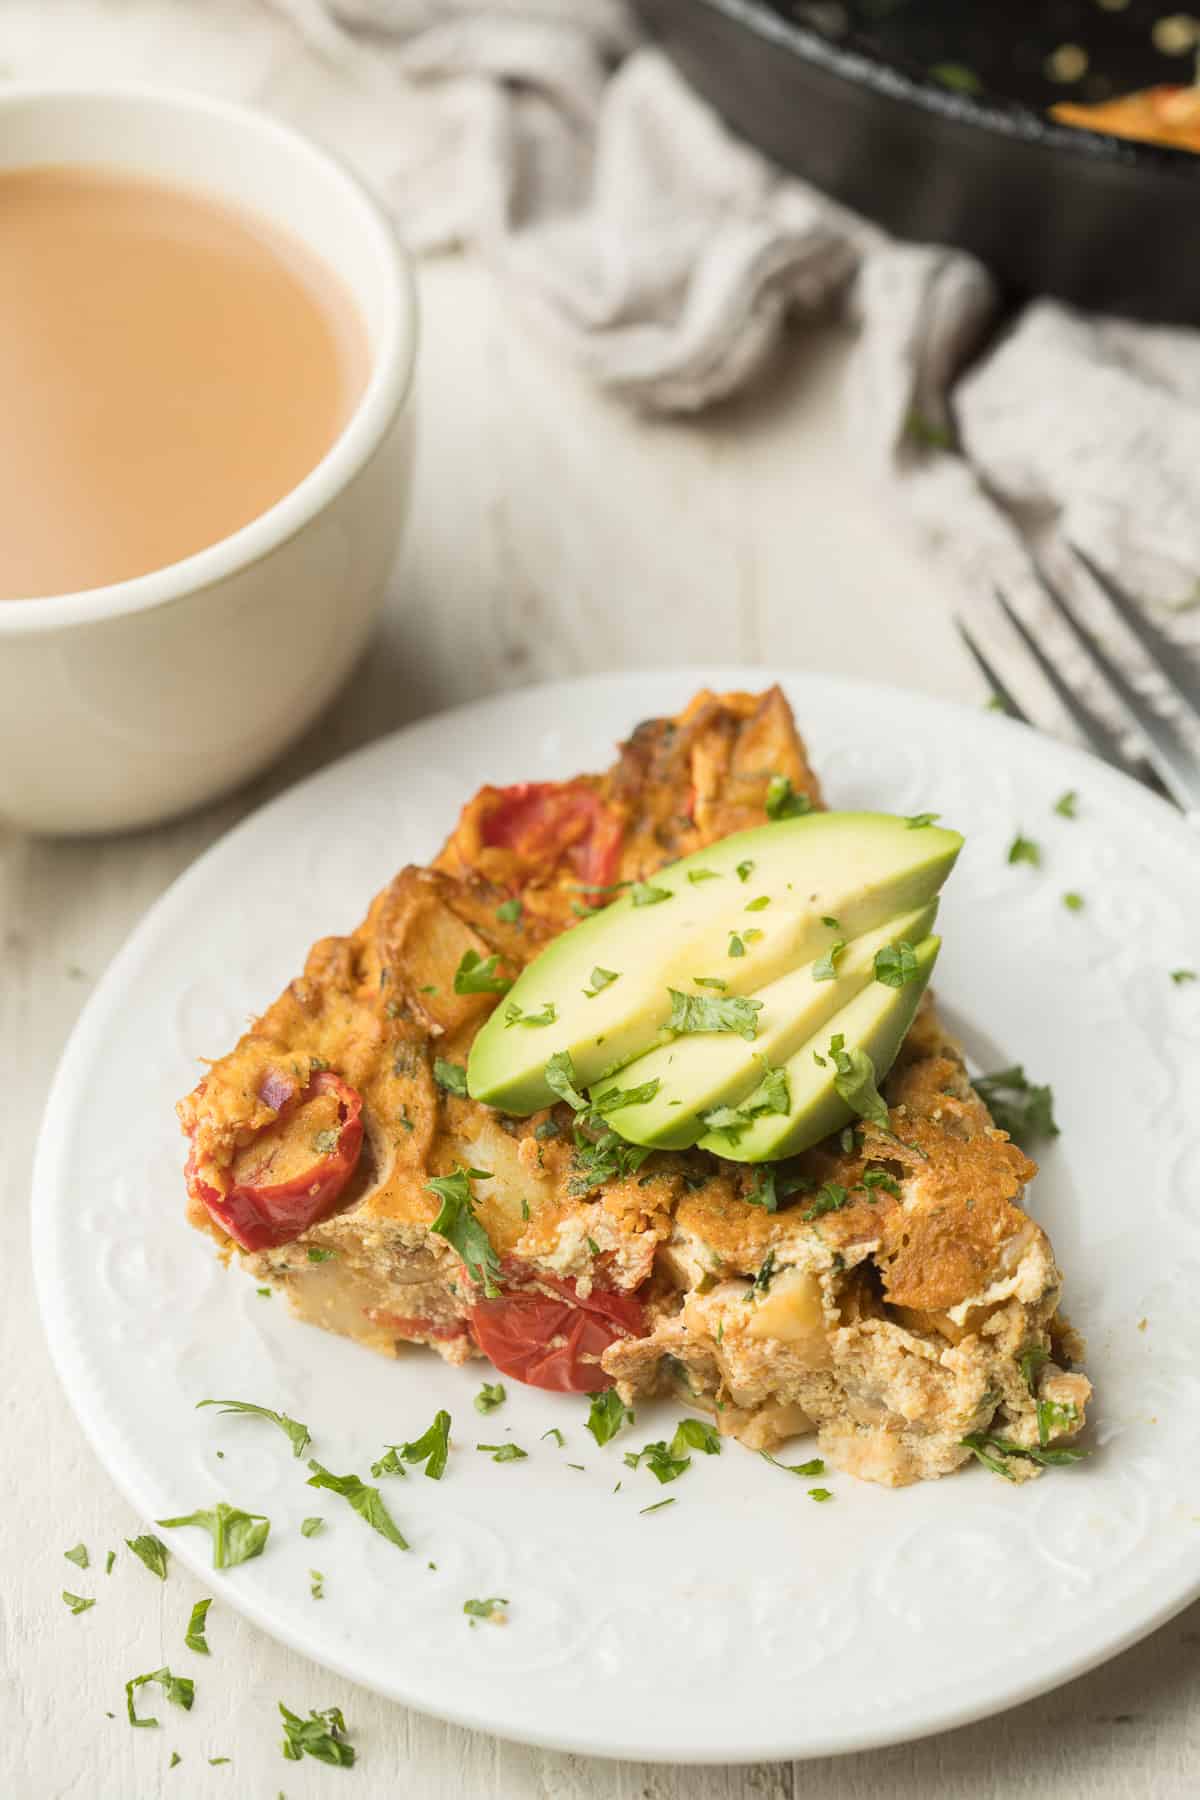 Slice of Vegan Frittata on a plate with avoacdo slices on top.